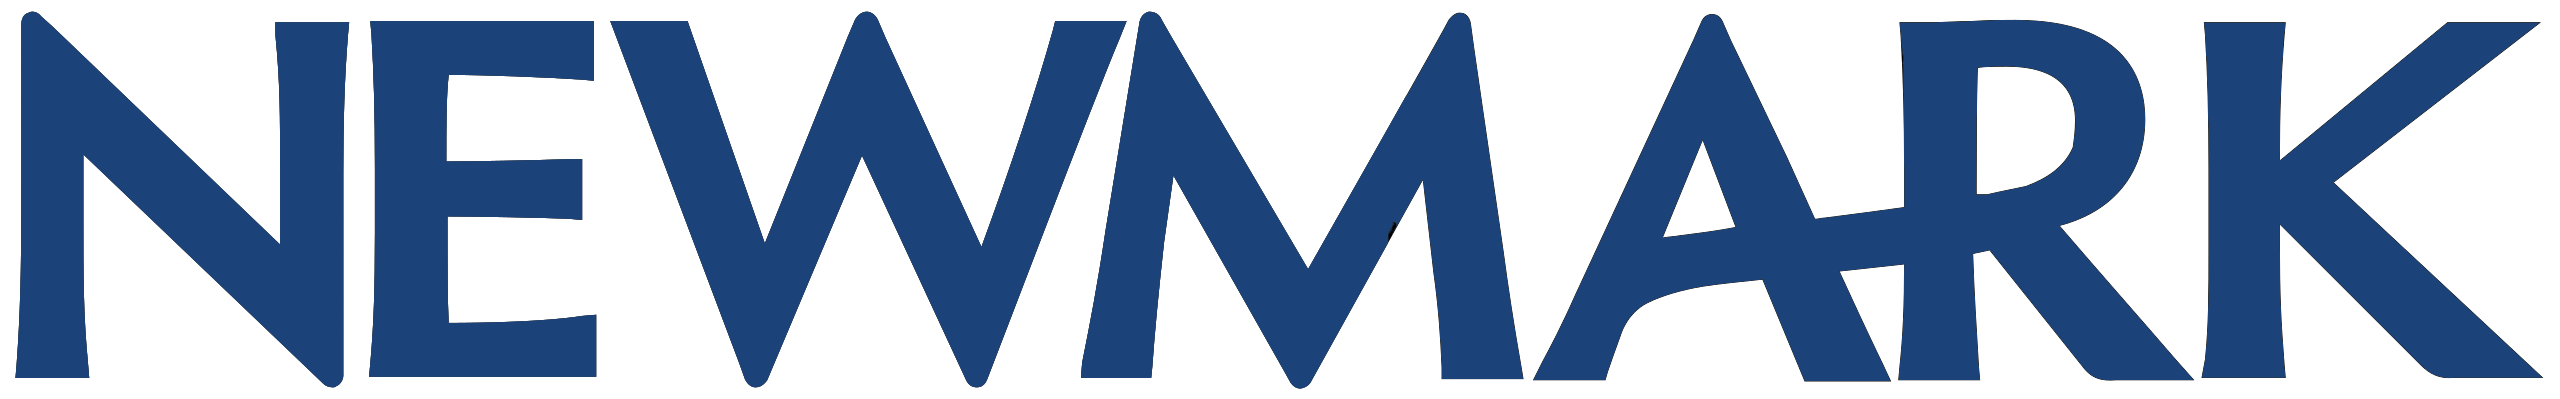 Newmark Logo in a navy blue color